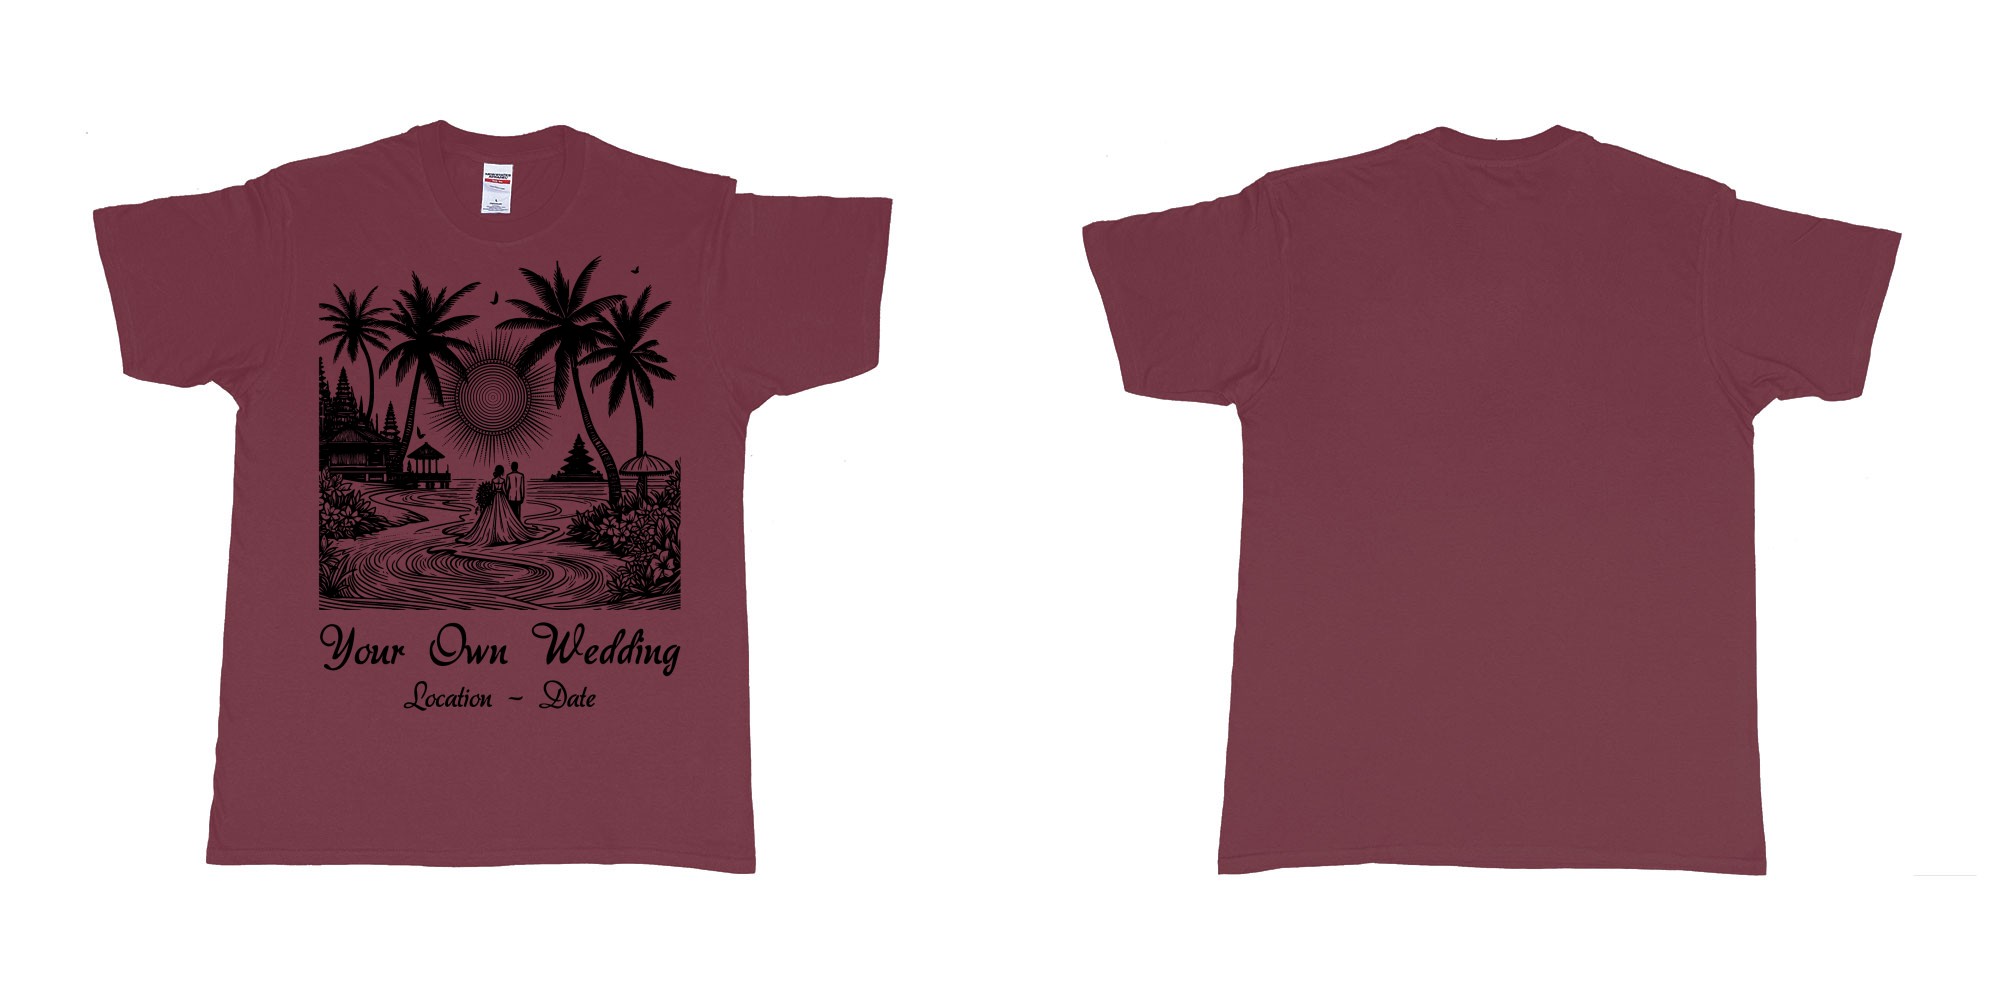 Custom tshirt design wedding couple drawing bali beach sea sunset custom printing souvenir gift in fabric color marron choice your own text made in Bali by The Pirate Way